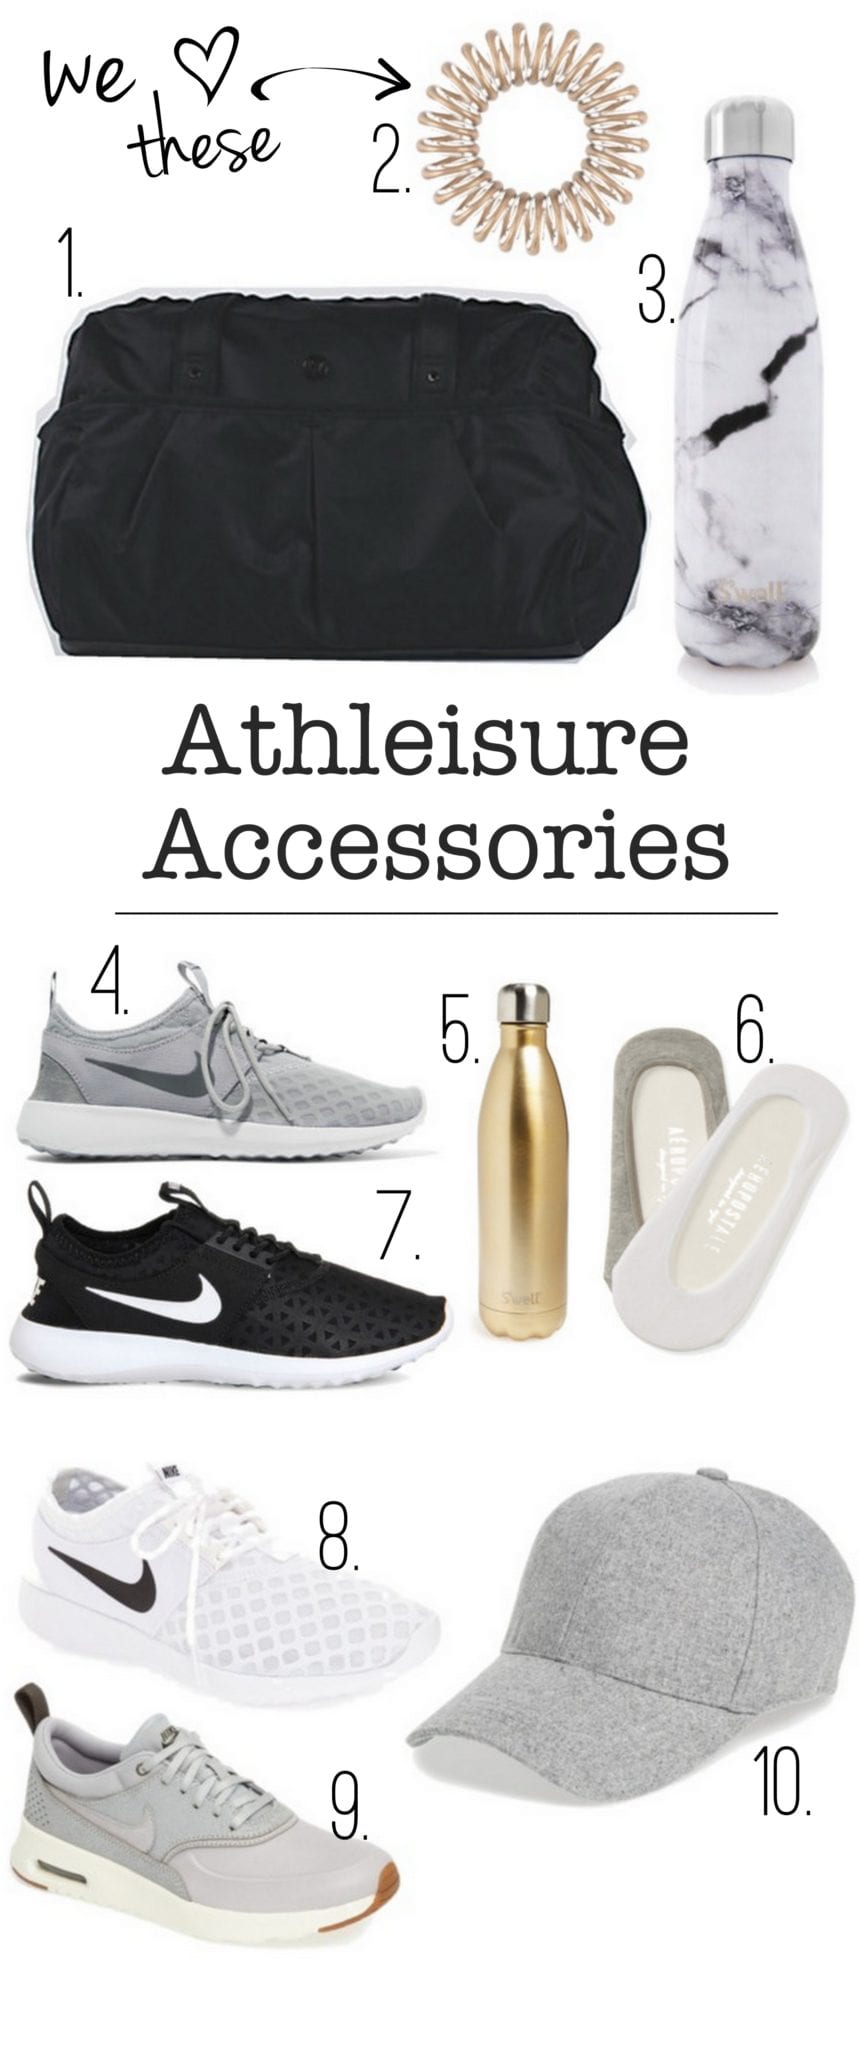 Accessories list: Workout Accessories & Fitness Goals for 2017 | DIY Playbook